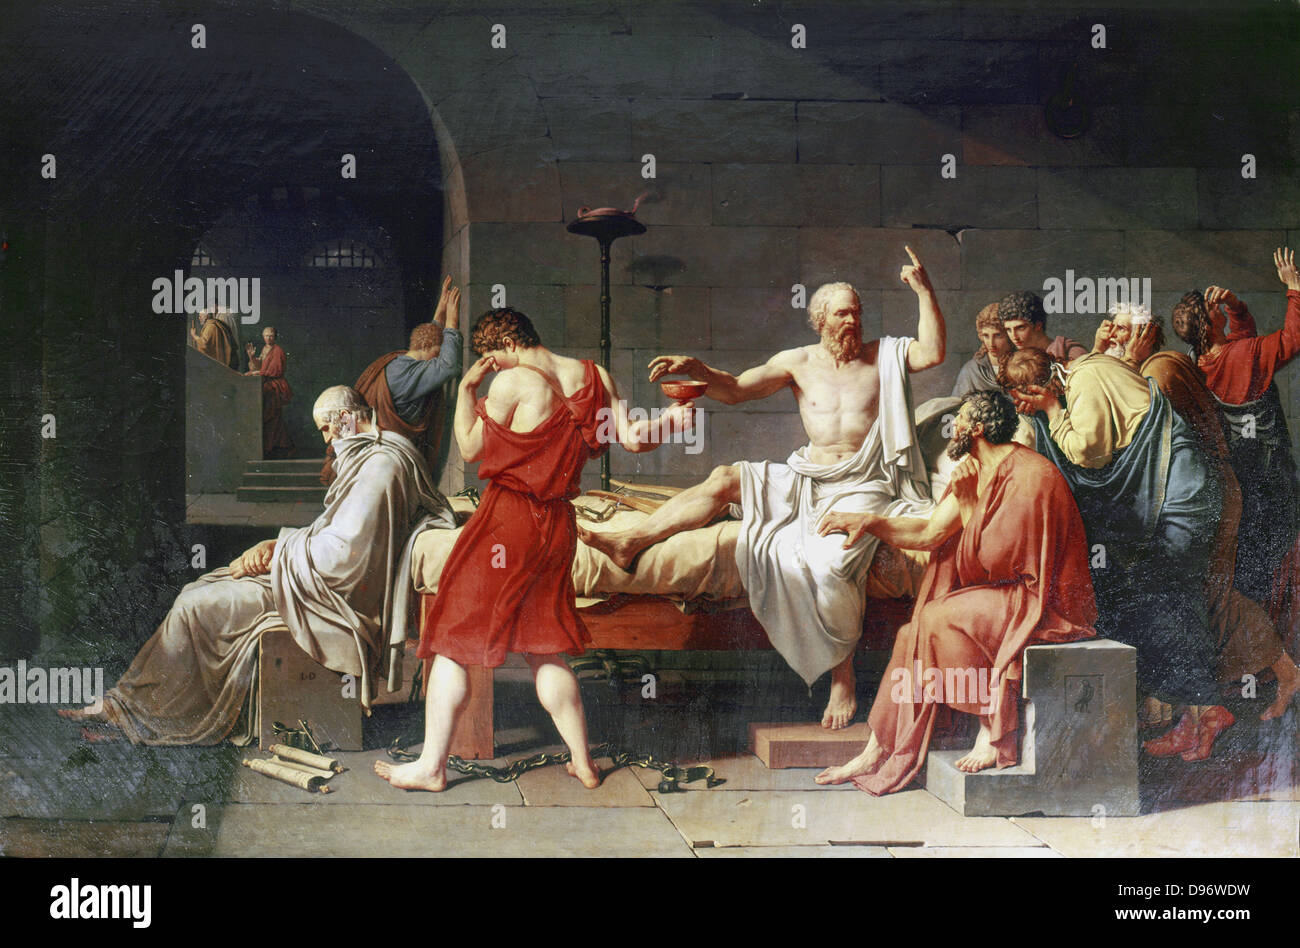 The Death of Socrates' 1787: Jacques Louis David (1748-1825) French historical painter. Oil on canvas Stock Photo